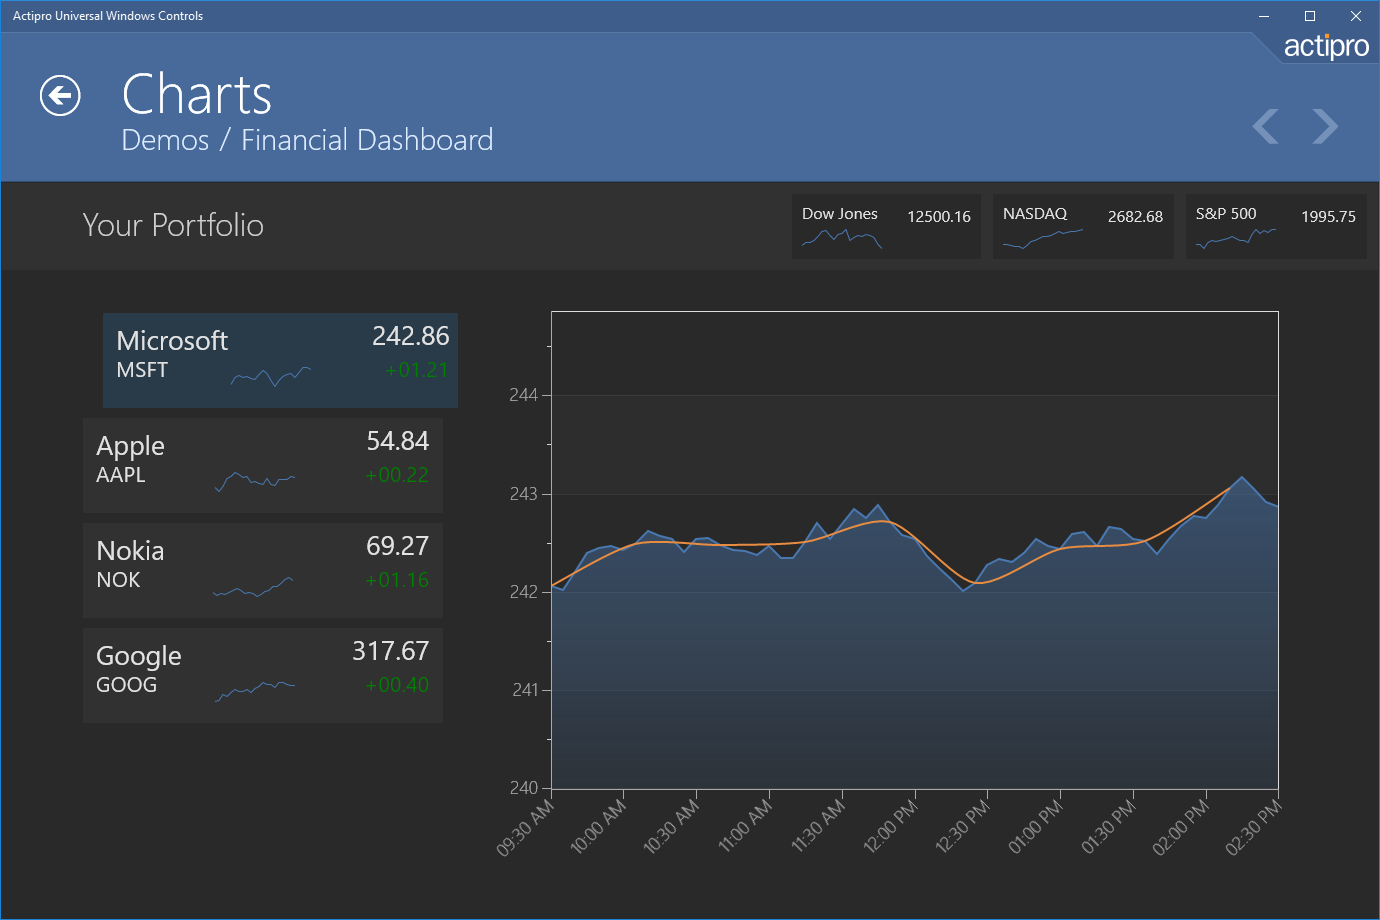 Build touch-friendly dashboards that can show real-time stock performance.